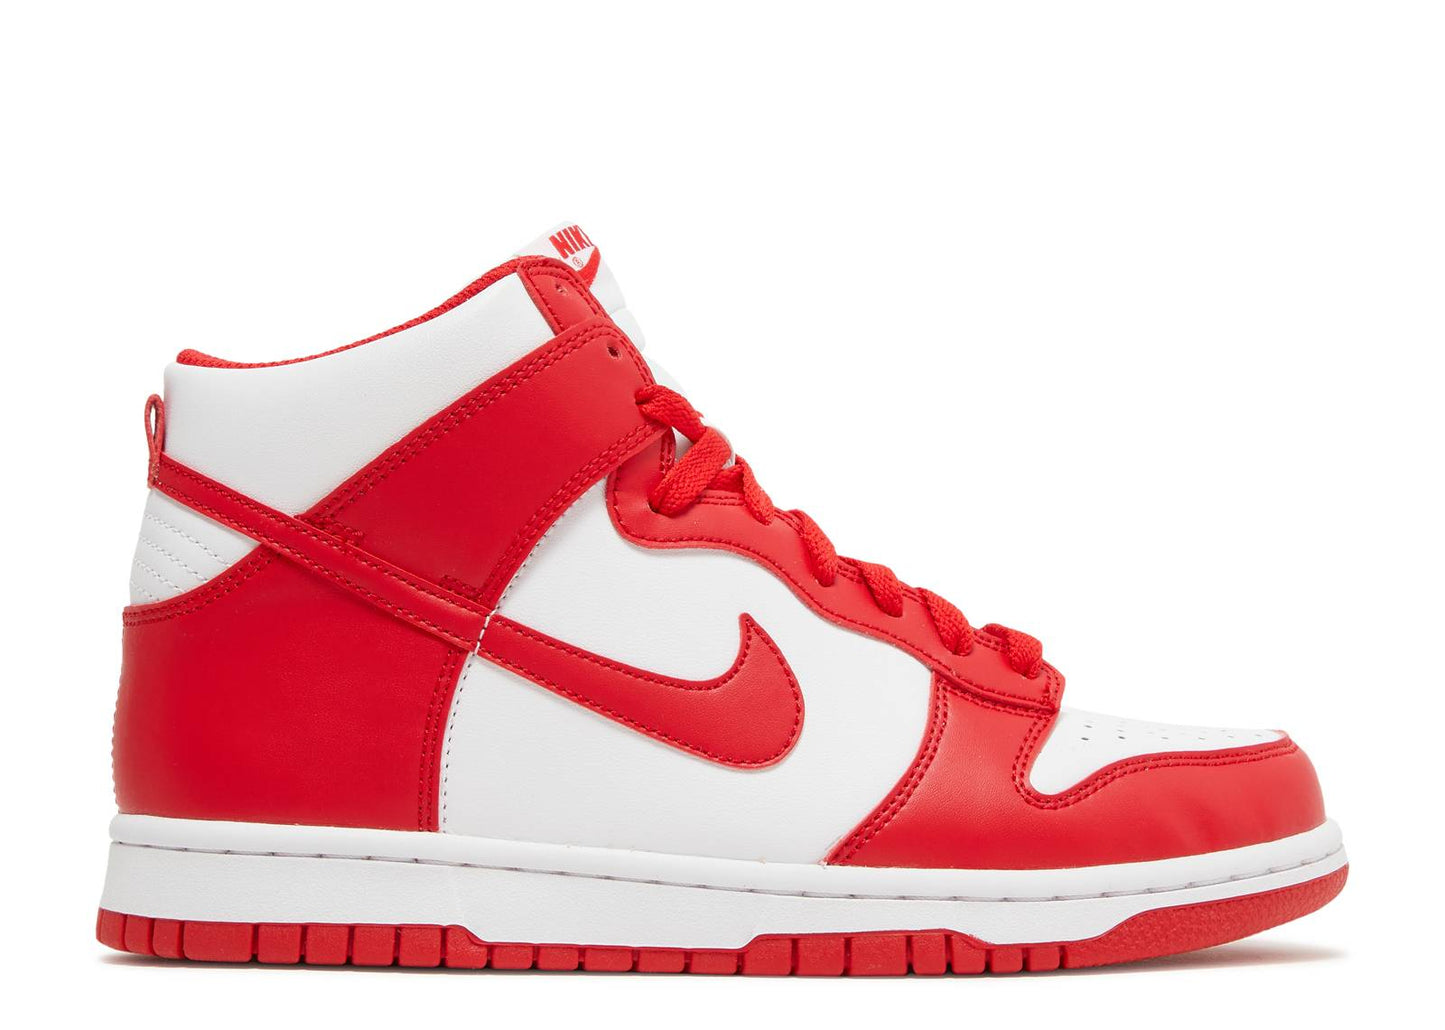 Nike Dunk High GS "Championship Red"